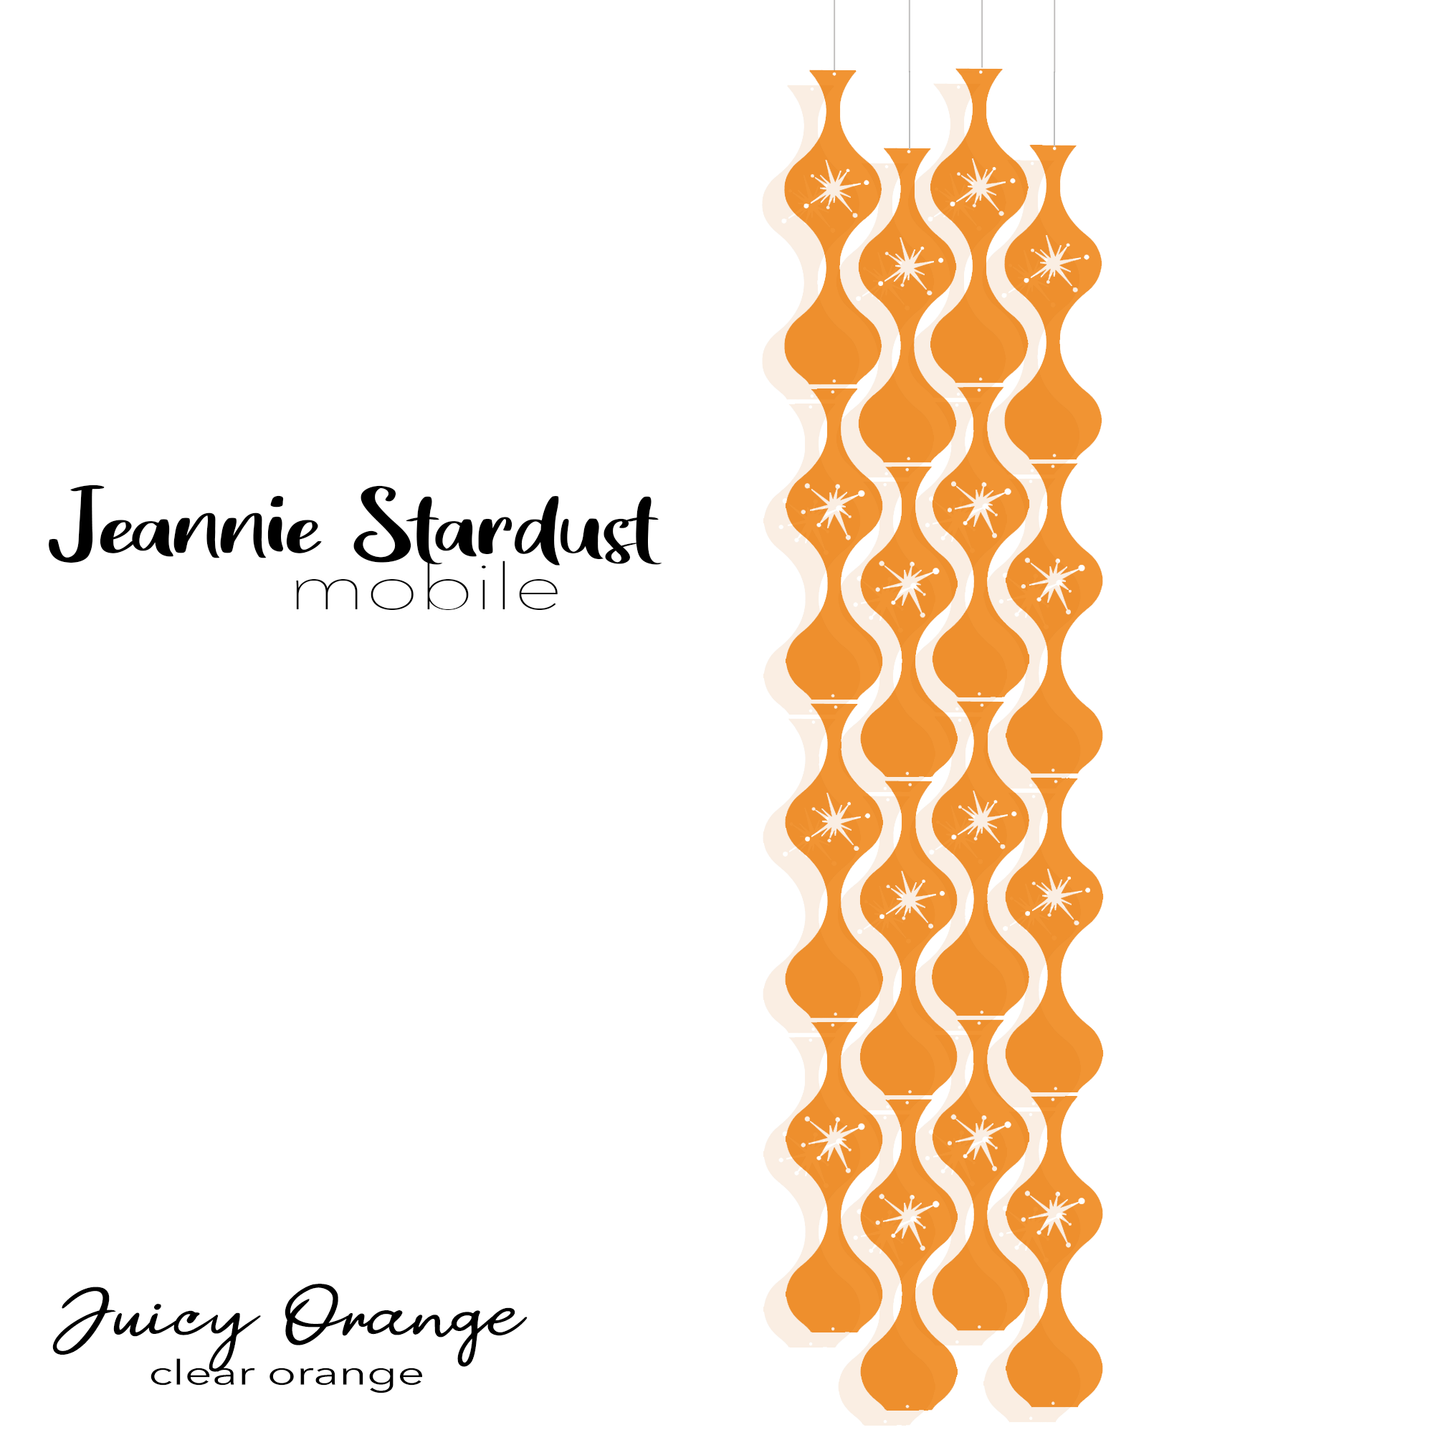  Jeannie Stardust Juicy Orange - Clear orange plexiglass acrylic hanging art mobiles in mid century modern style for home decor by AtomicMobiles.com